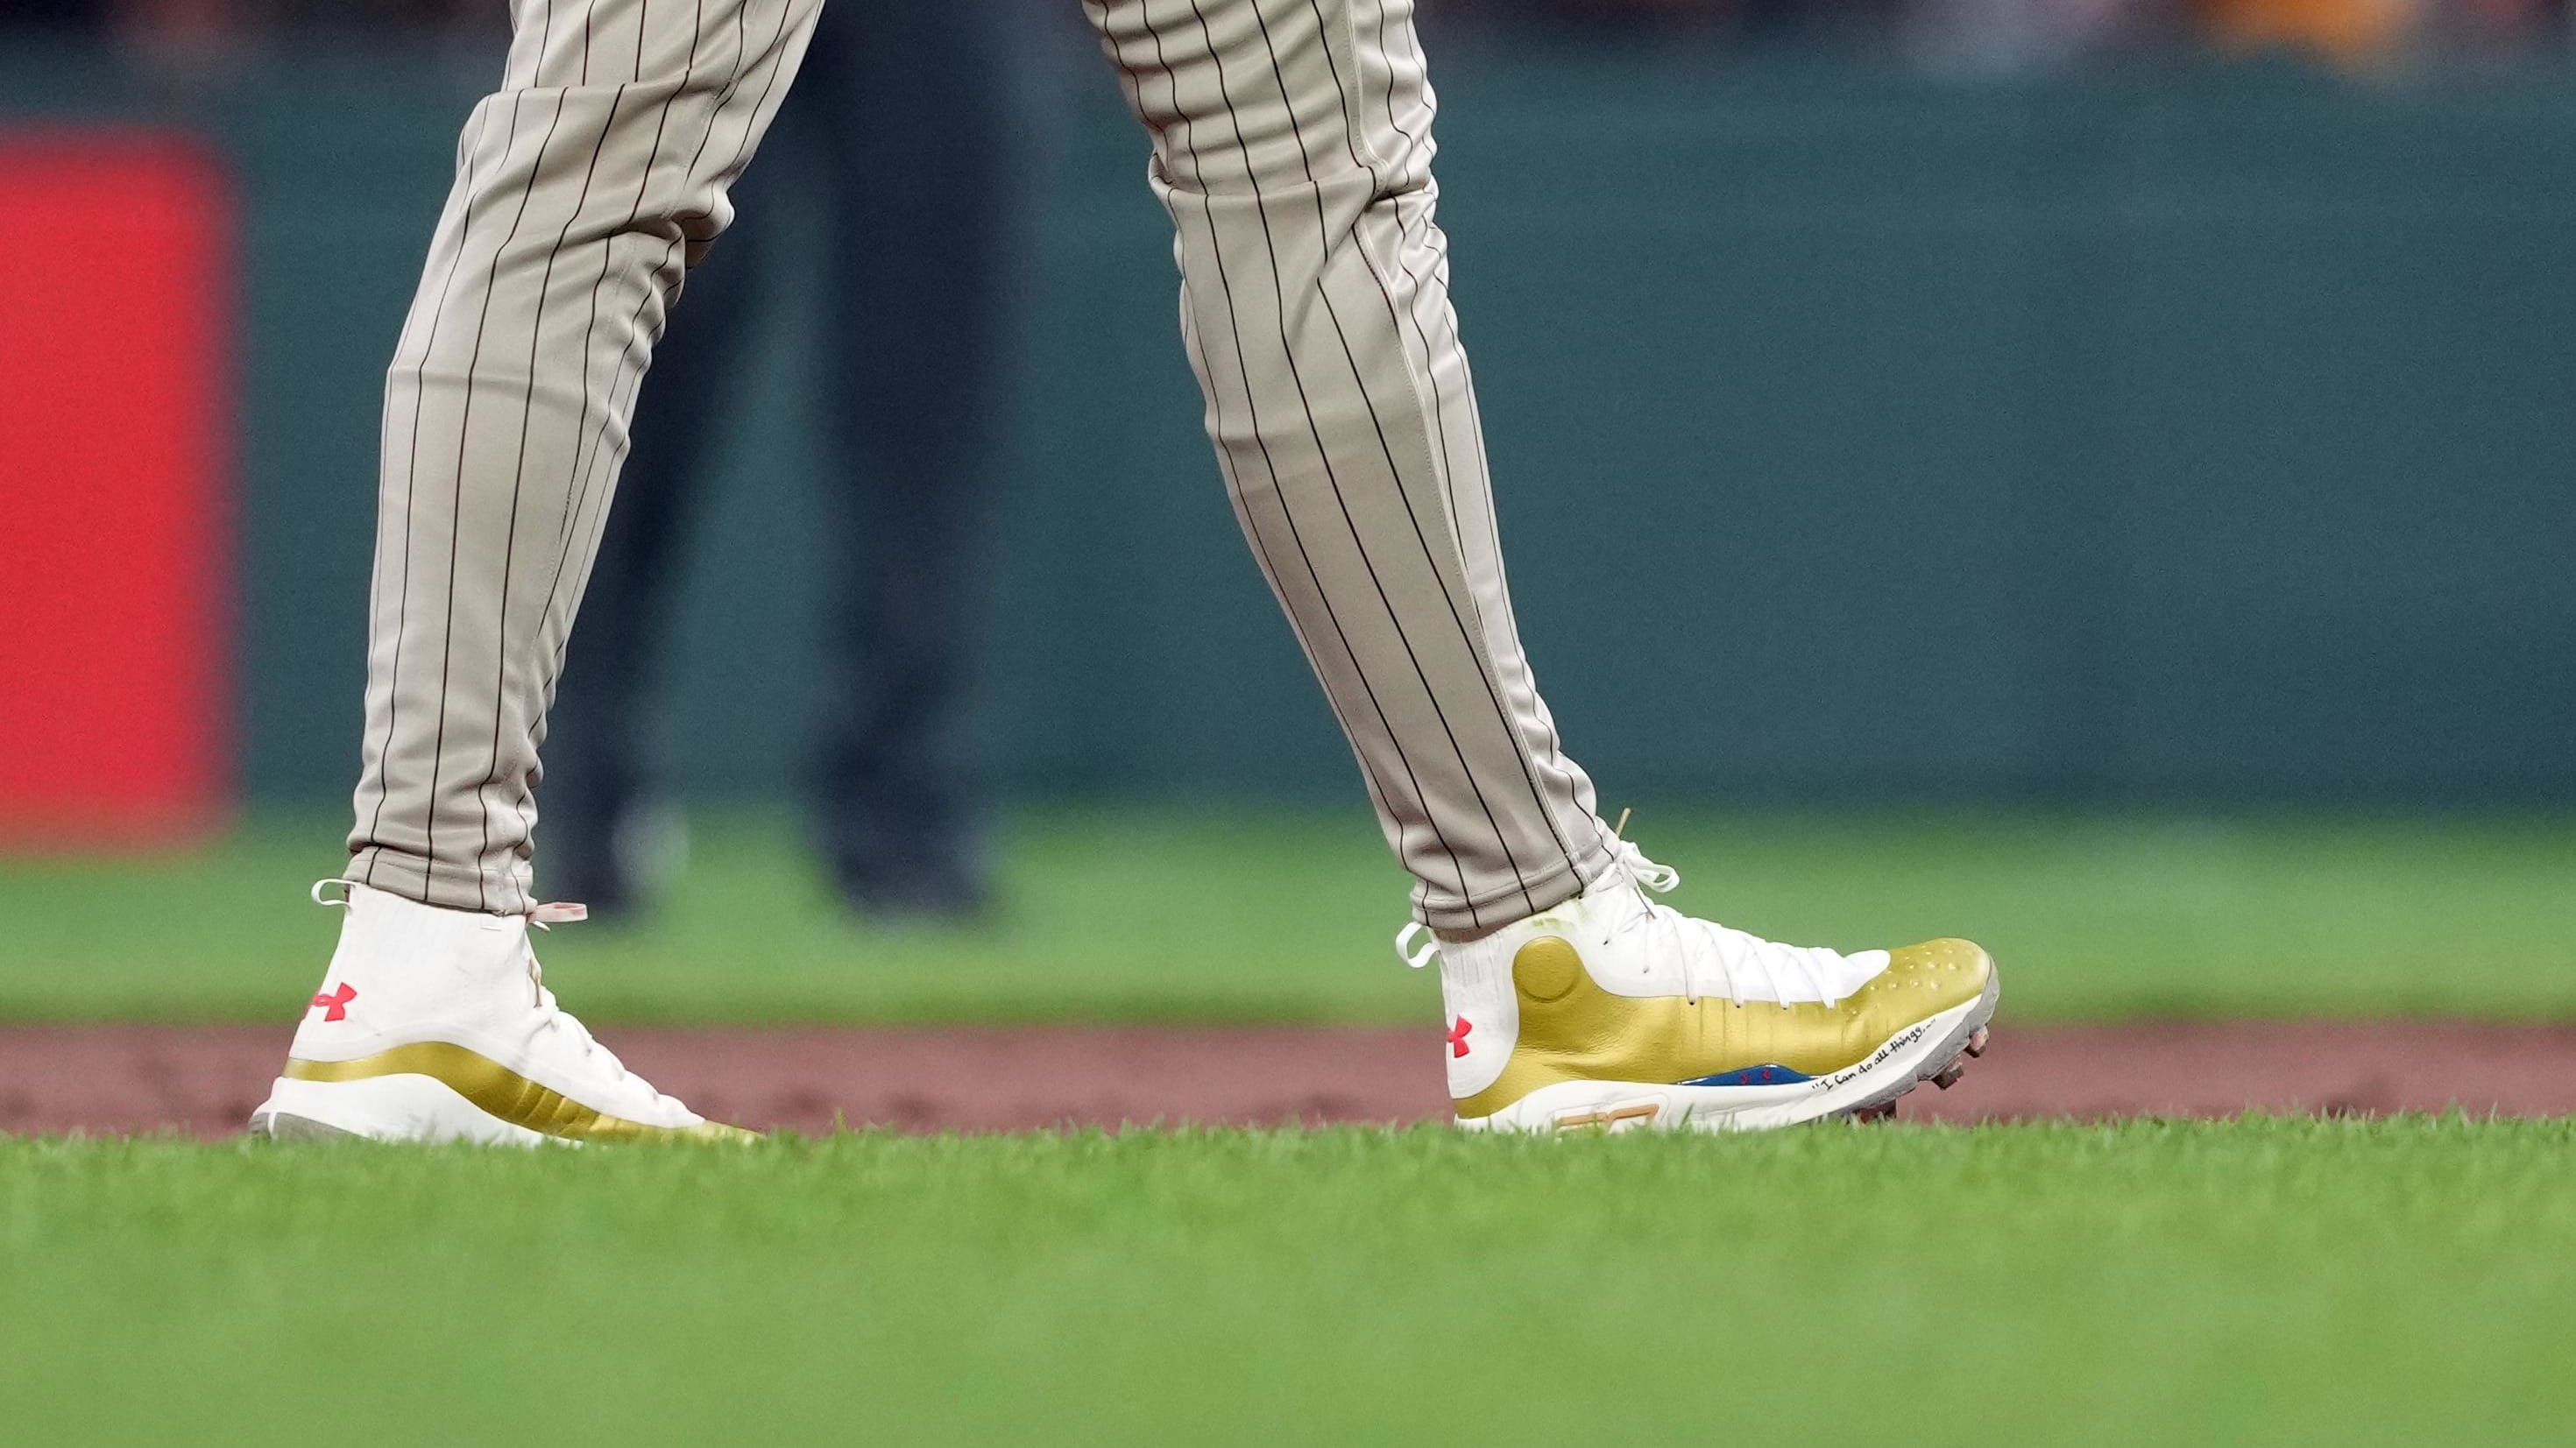 San Diego Padres right fielder Fernando Tatis Jr.'s white and gold Under Armour cleats.